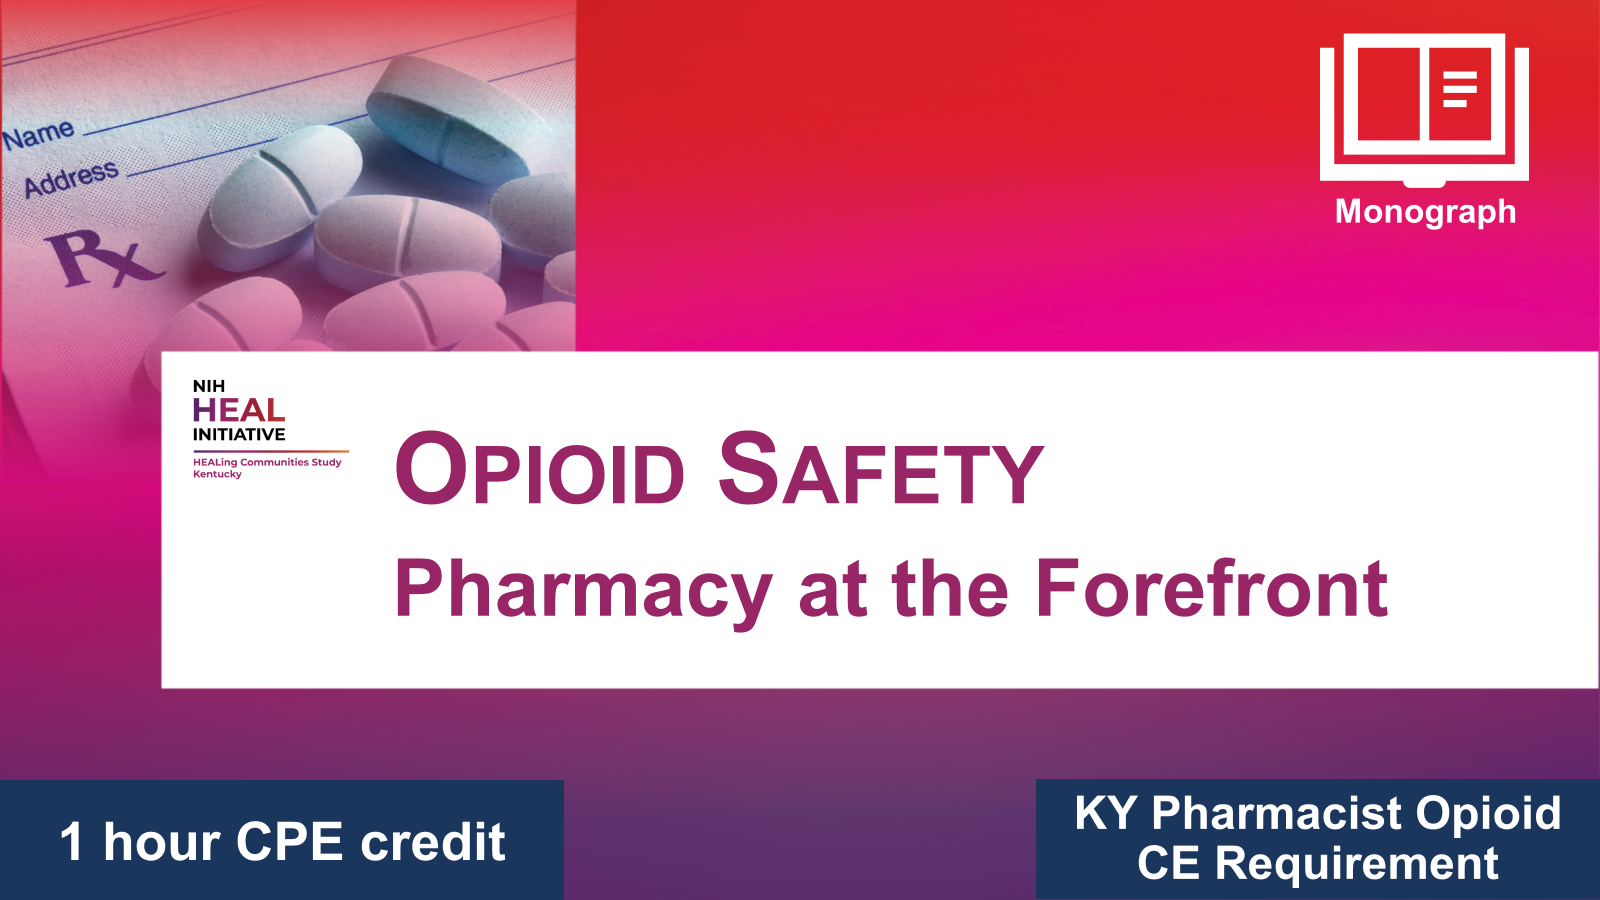 Opioid Safety: Pharmacy at the Forefront